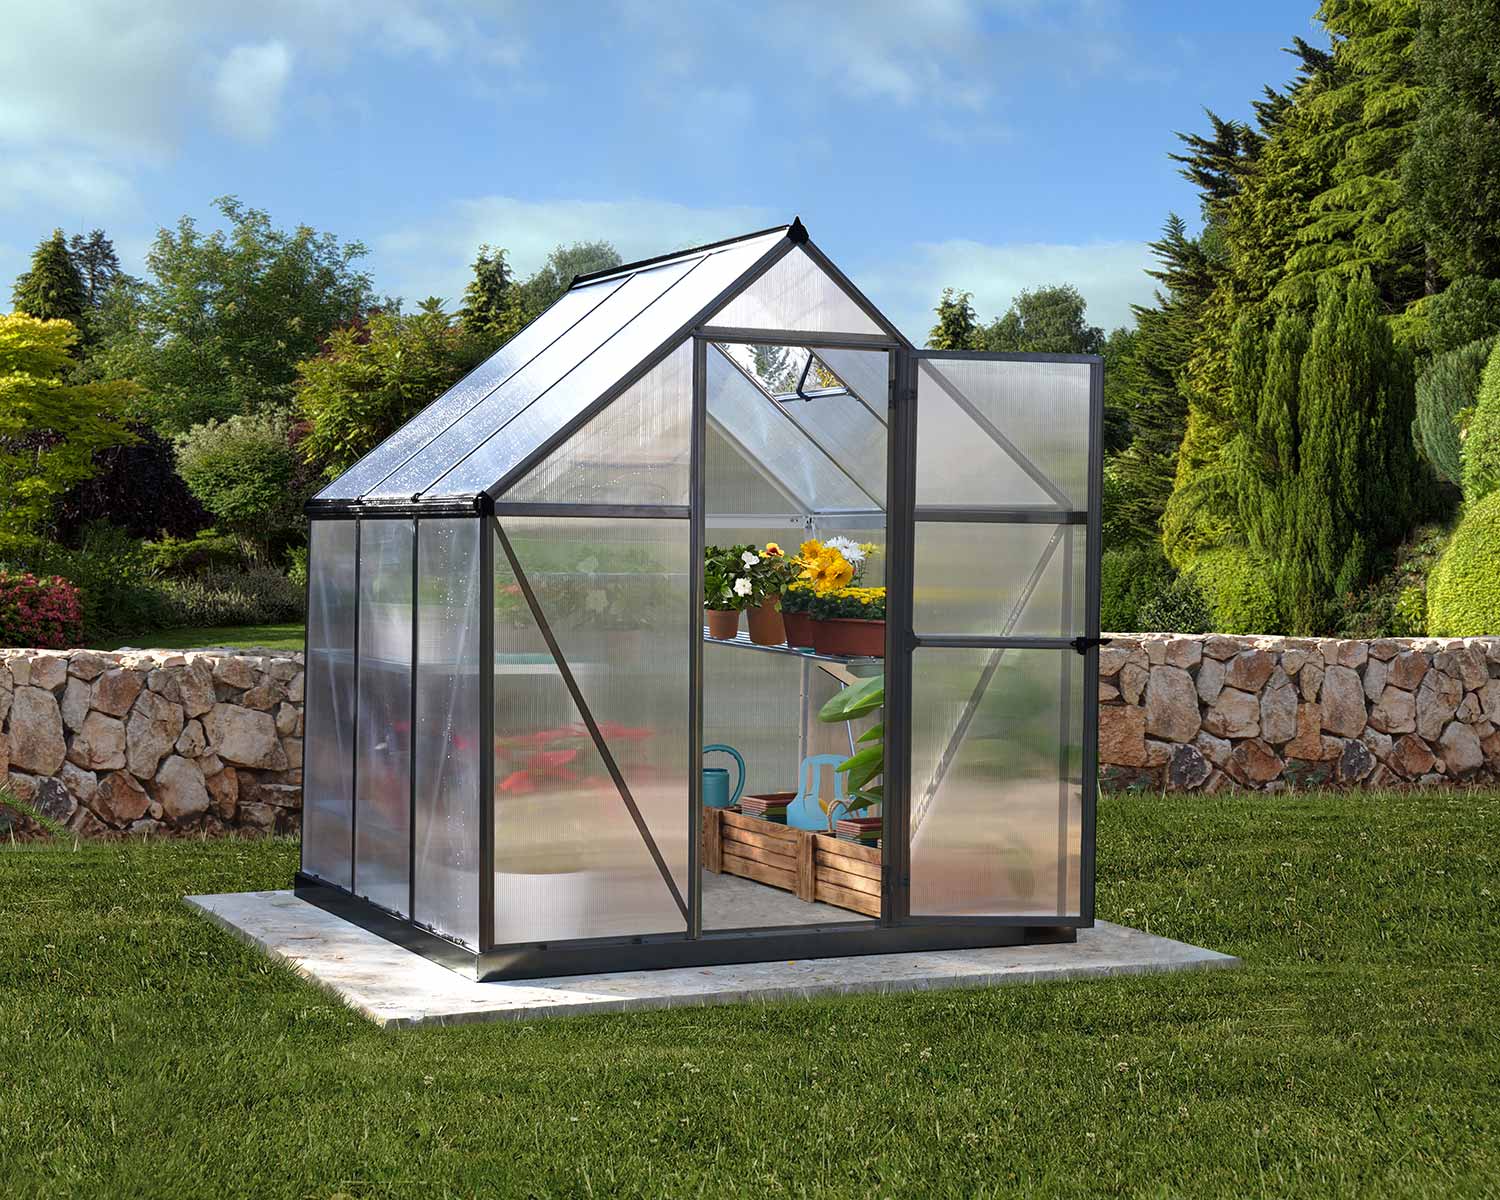 Mythos 6 ft. x 6 ft. Greenhouse Grey Structure &amp; Twinwall Panels outside on a lawn